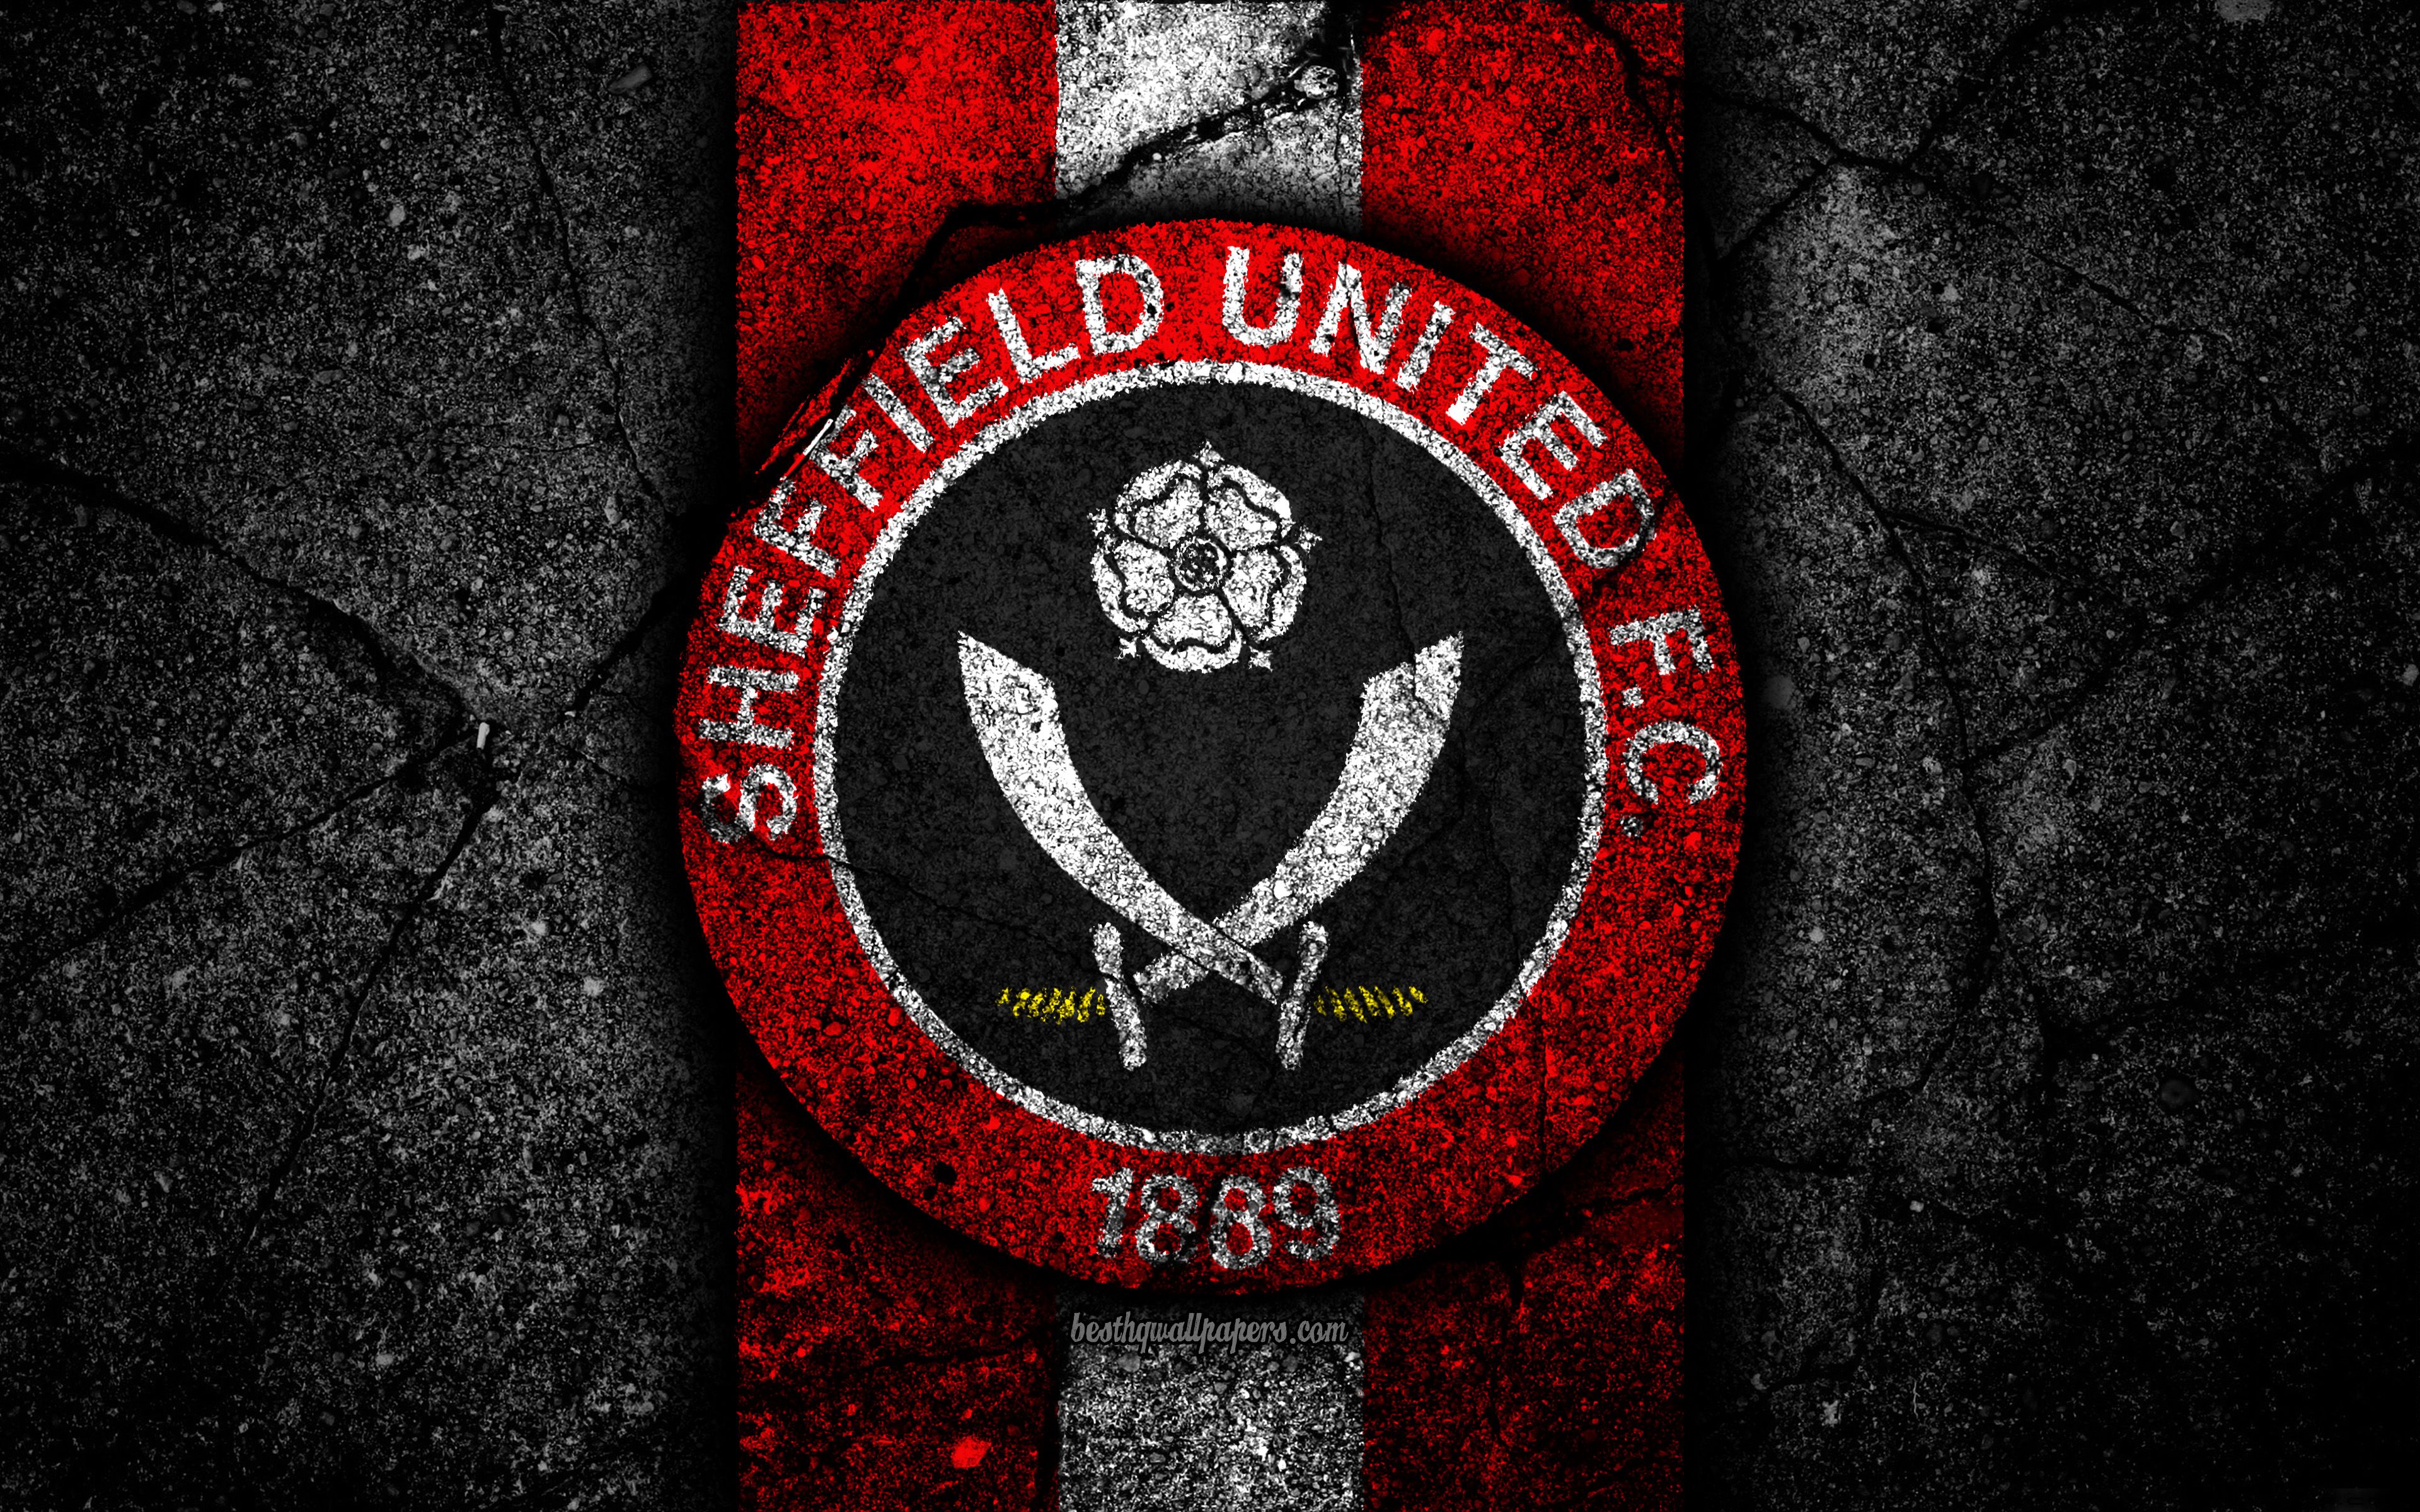 Sheffield United F.C. Wallpapers